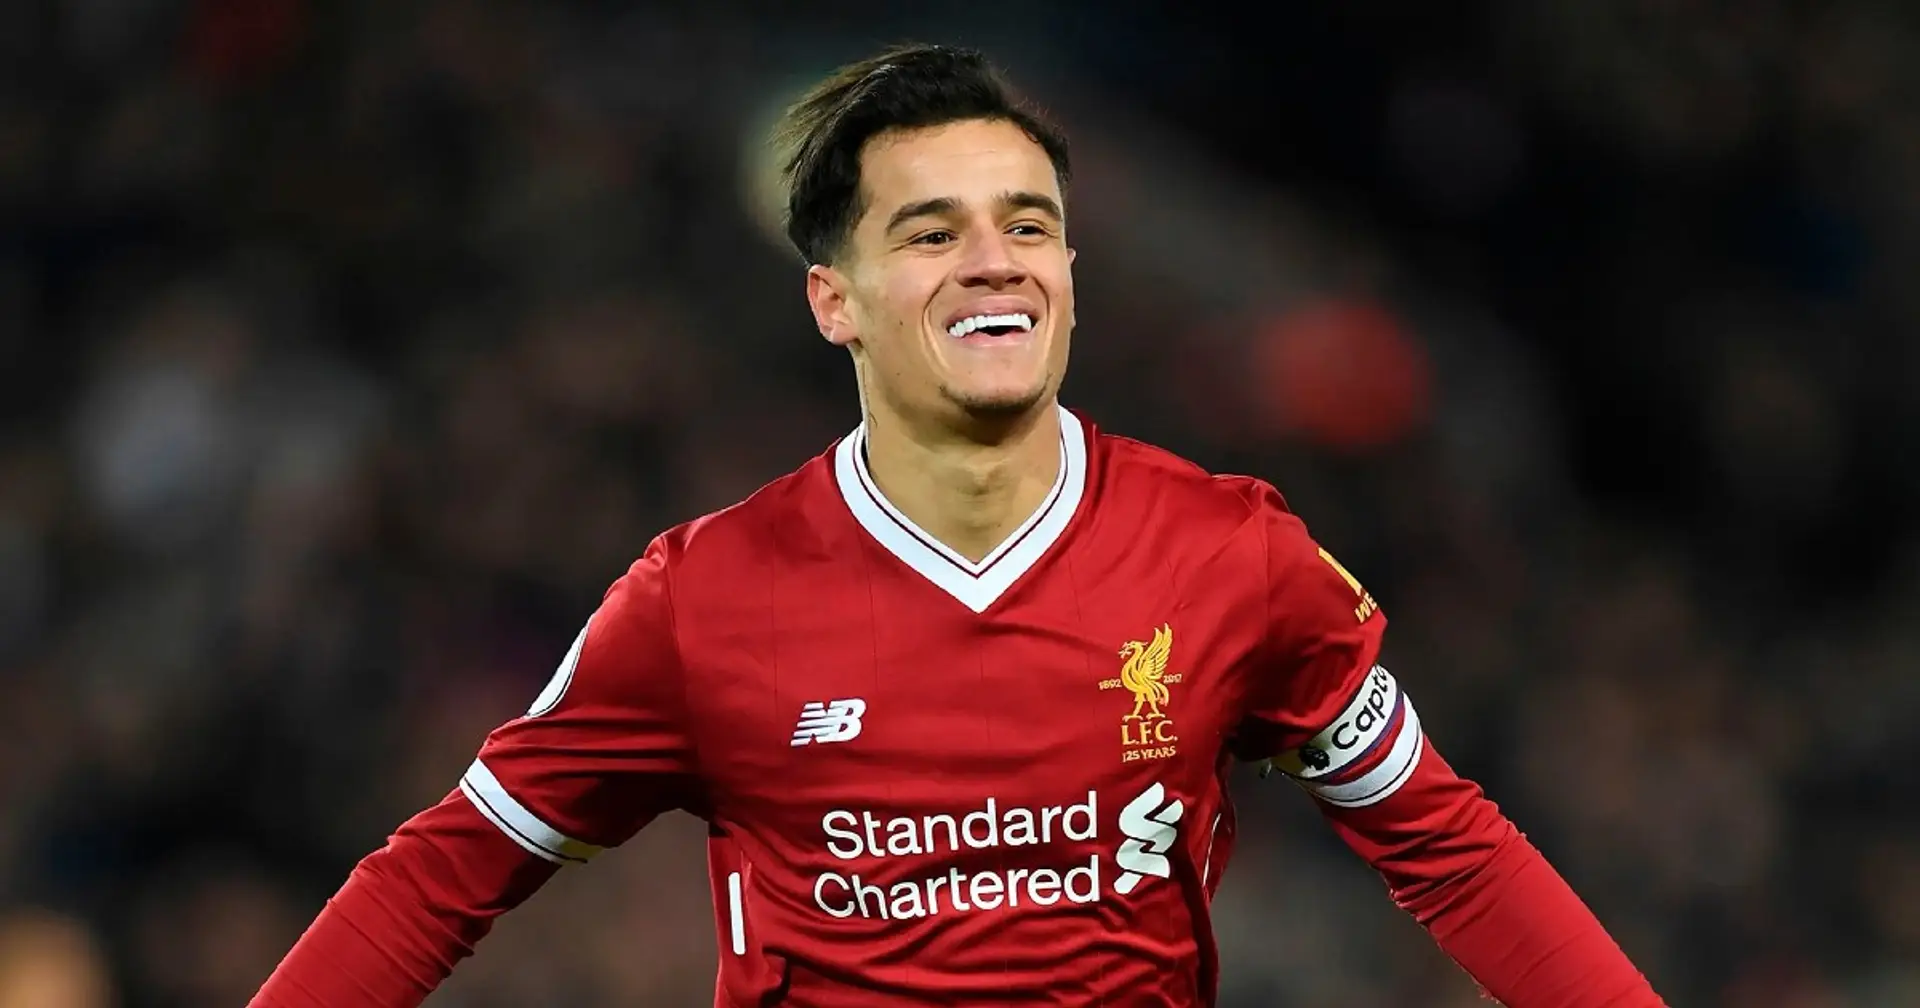 'I still watch his videos to this day': Liverpool player feeling Coutinho's influence years after leaving